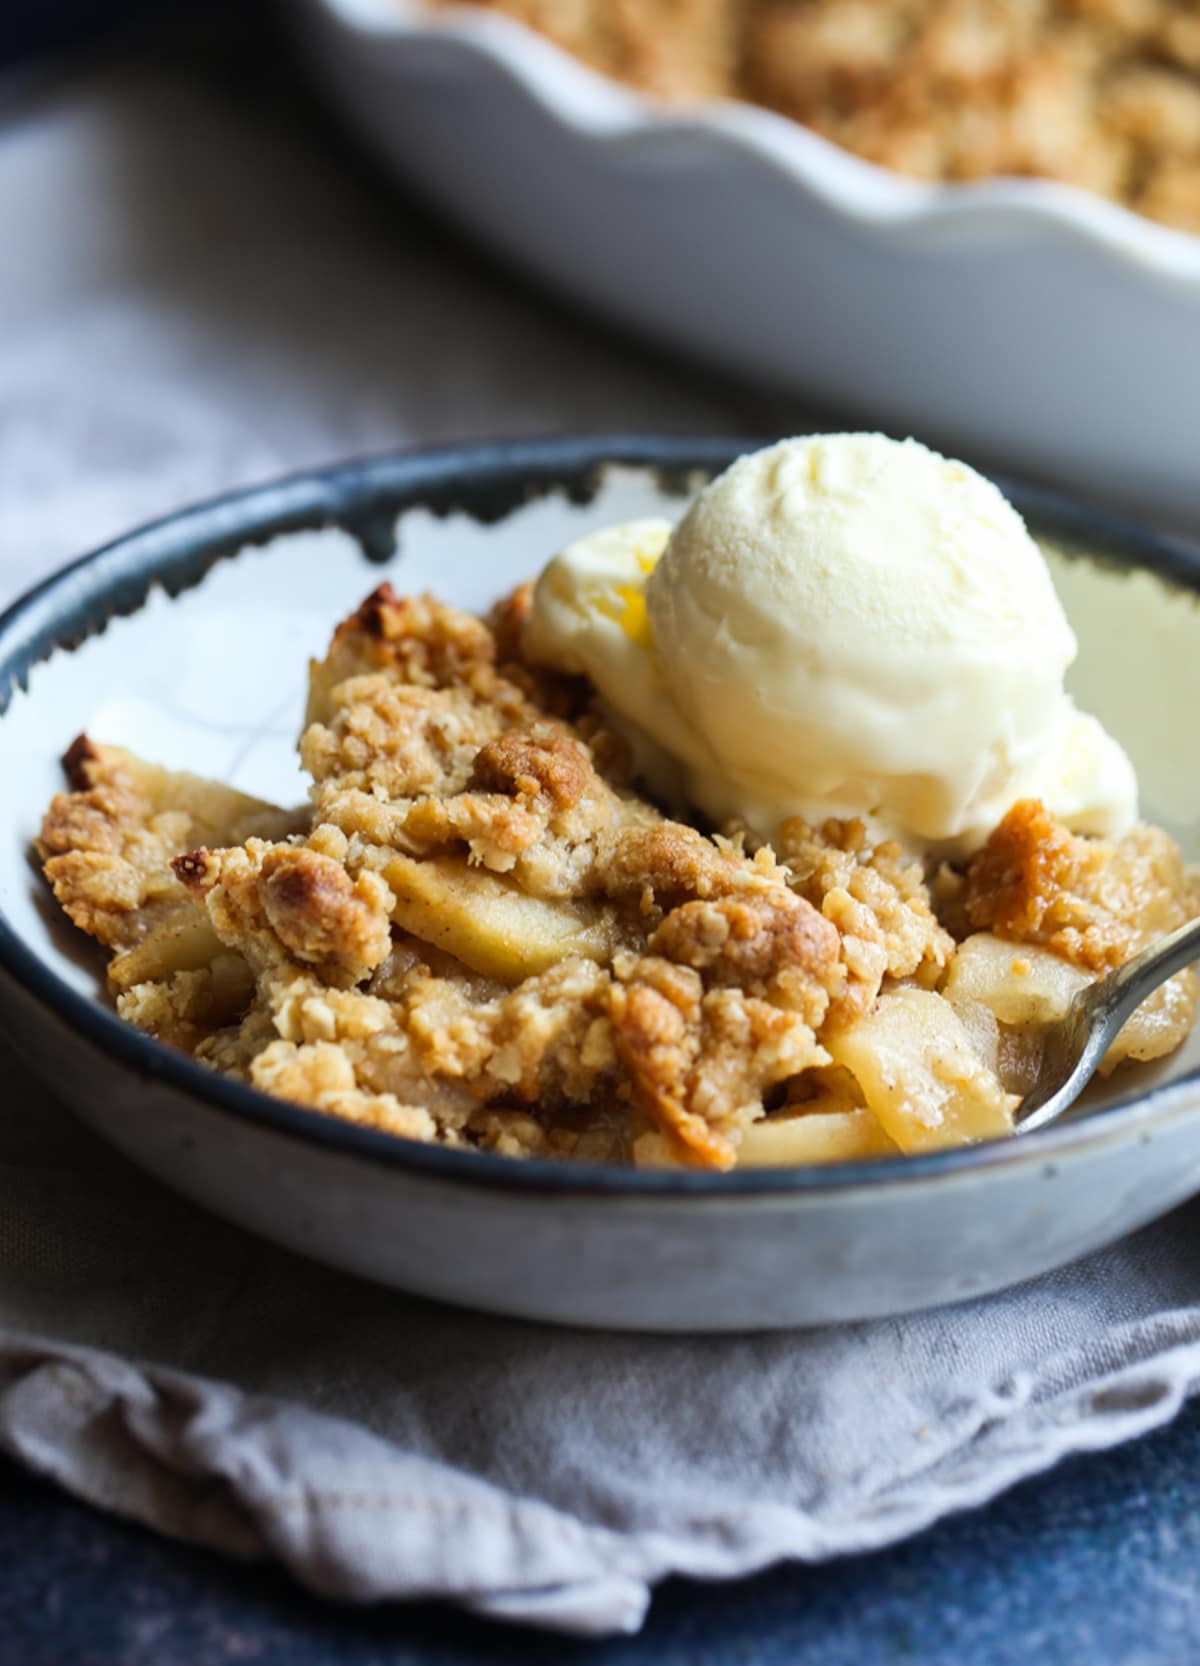 Apple crisp portion in a bowl with a spoon and a scoop of ice cream